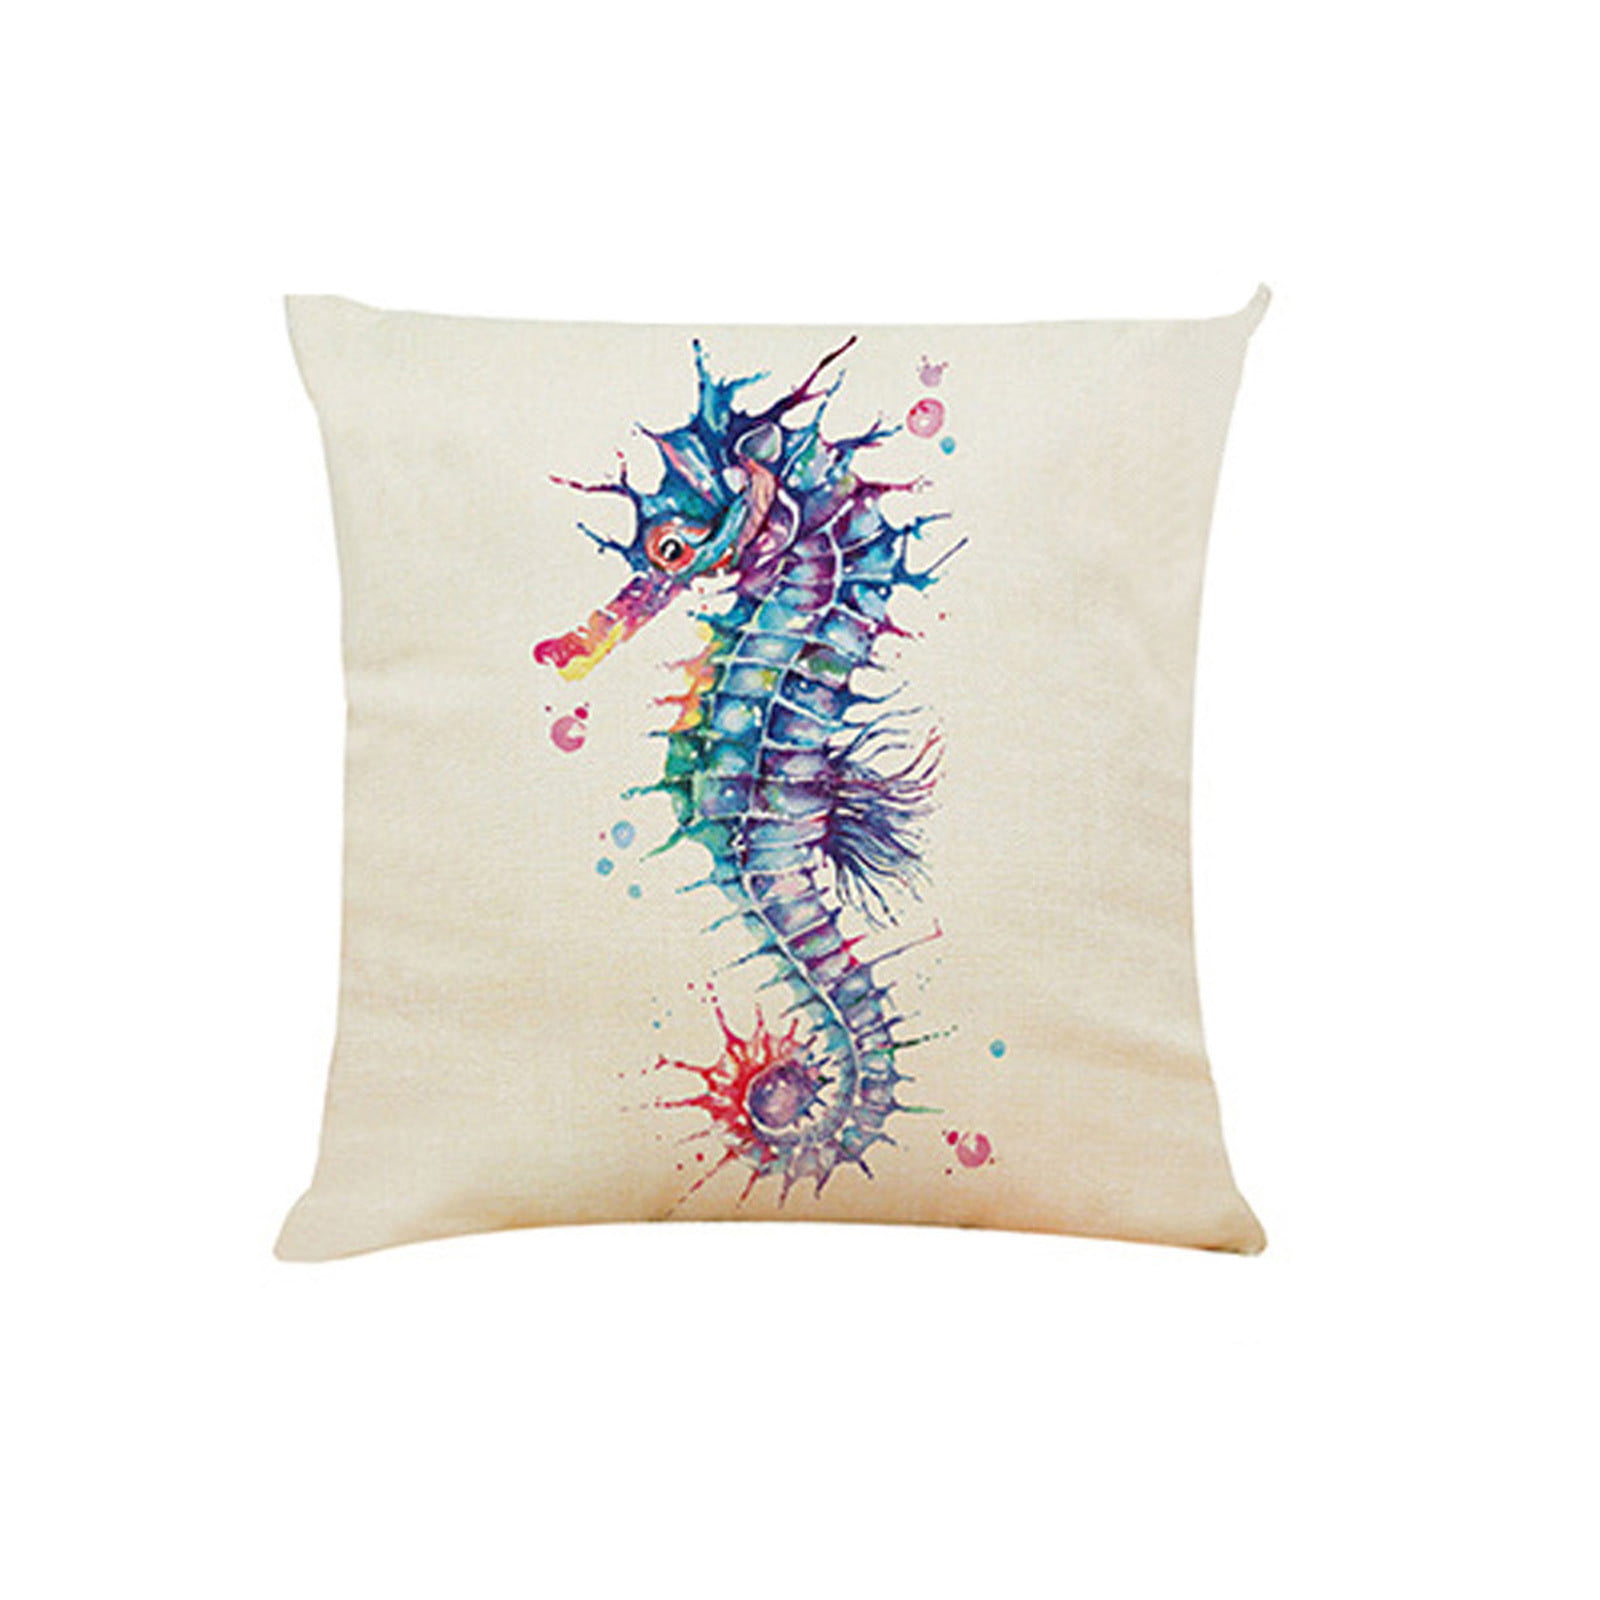 Seahorse Gifts Seahorse Colorful Ocean Animals Marine Life Gifts Throw Pillow Multicolor 16x16 